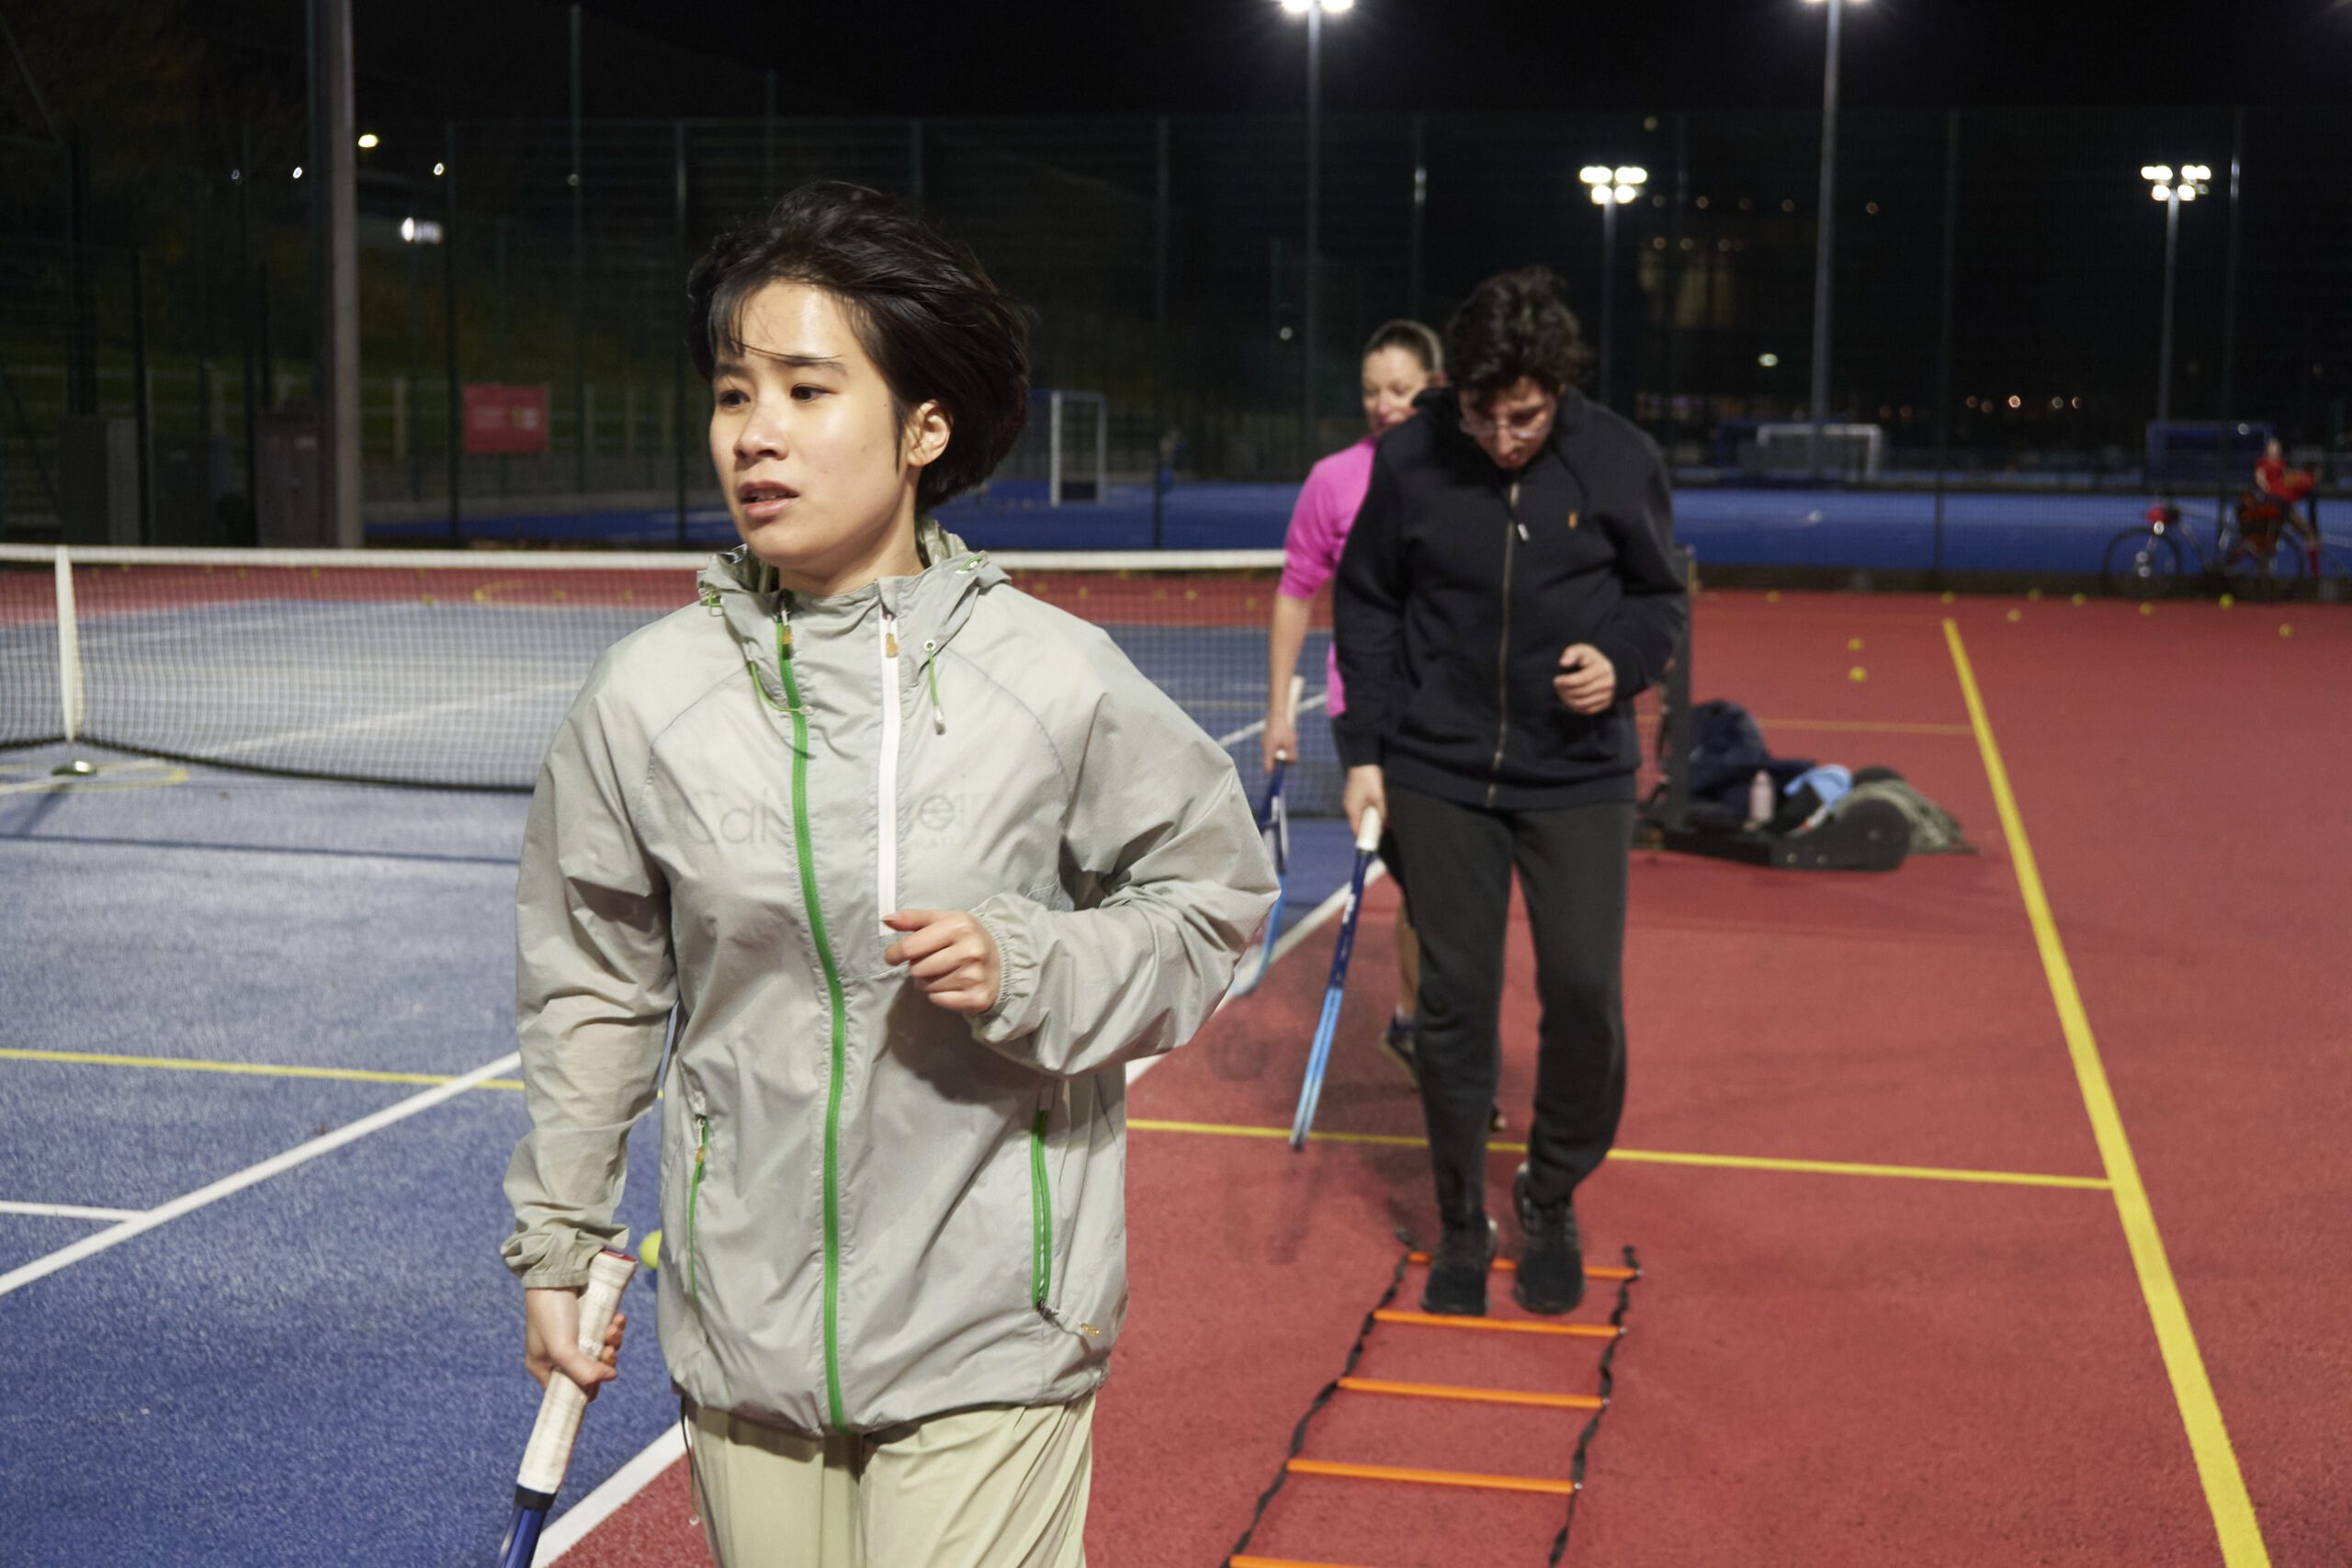 Two people running on the tennis courts, through a ladder on the floor holding tennis rackets in their hands.